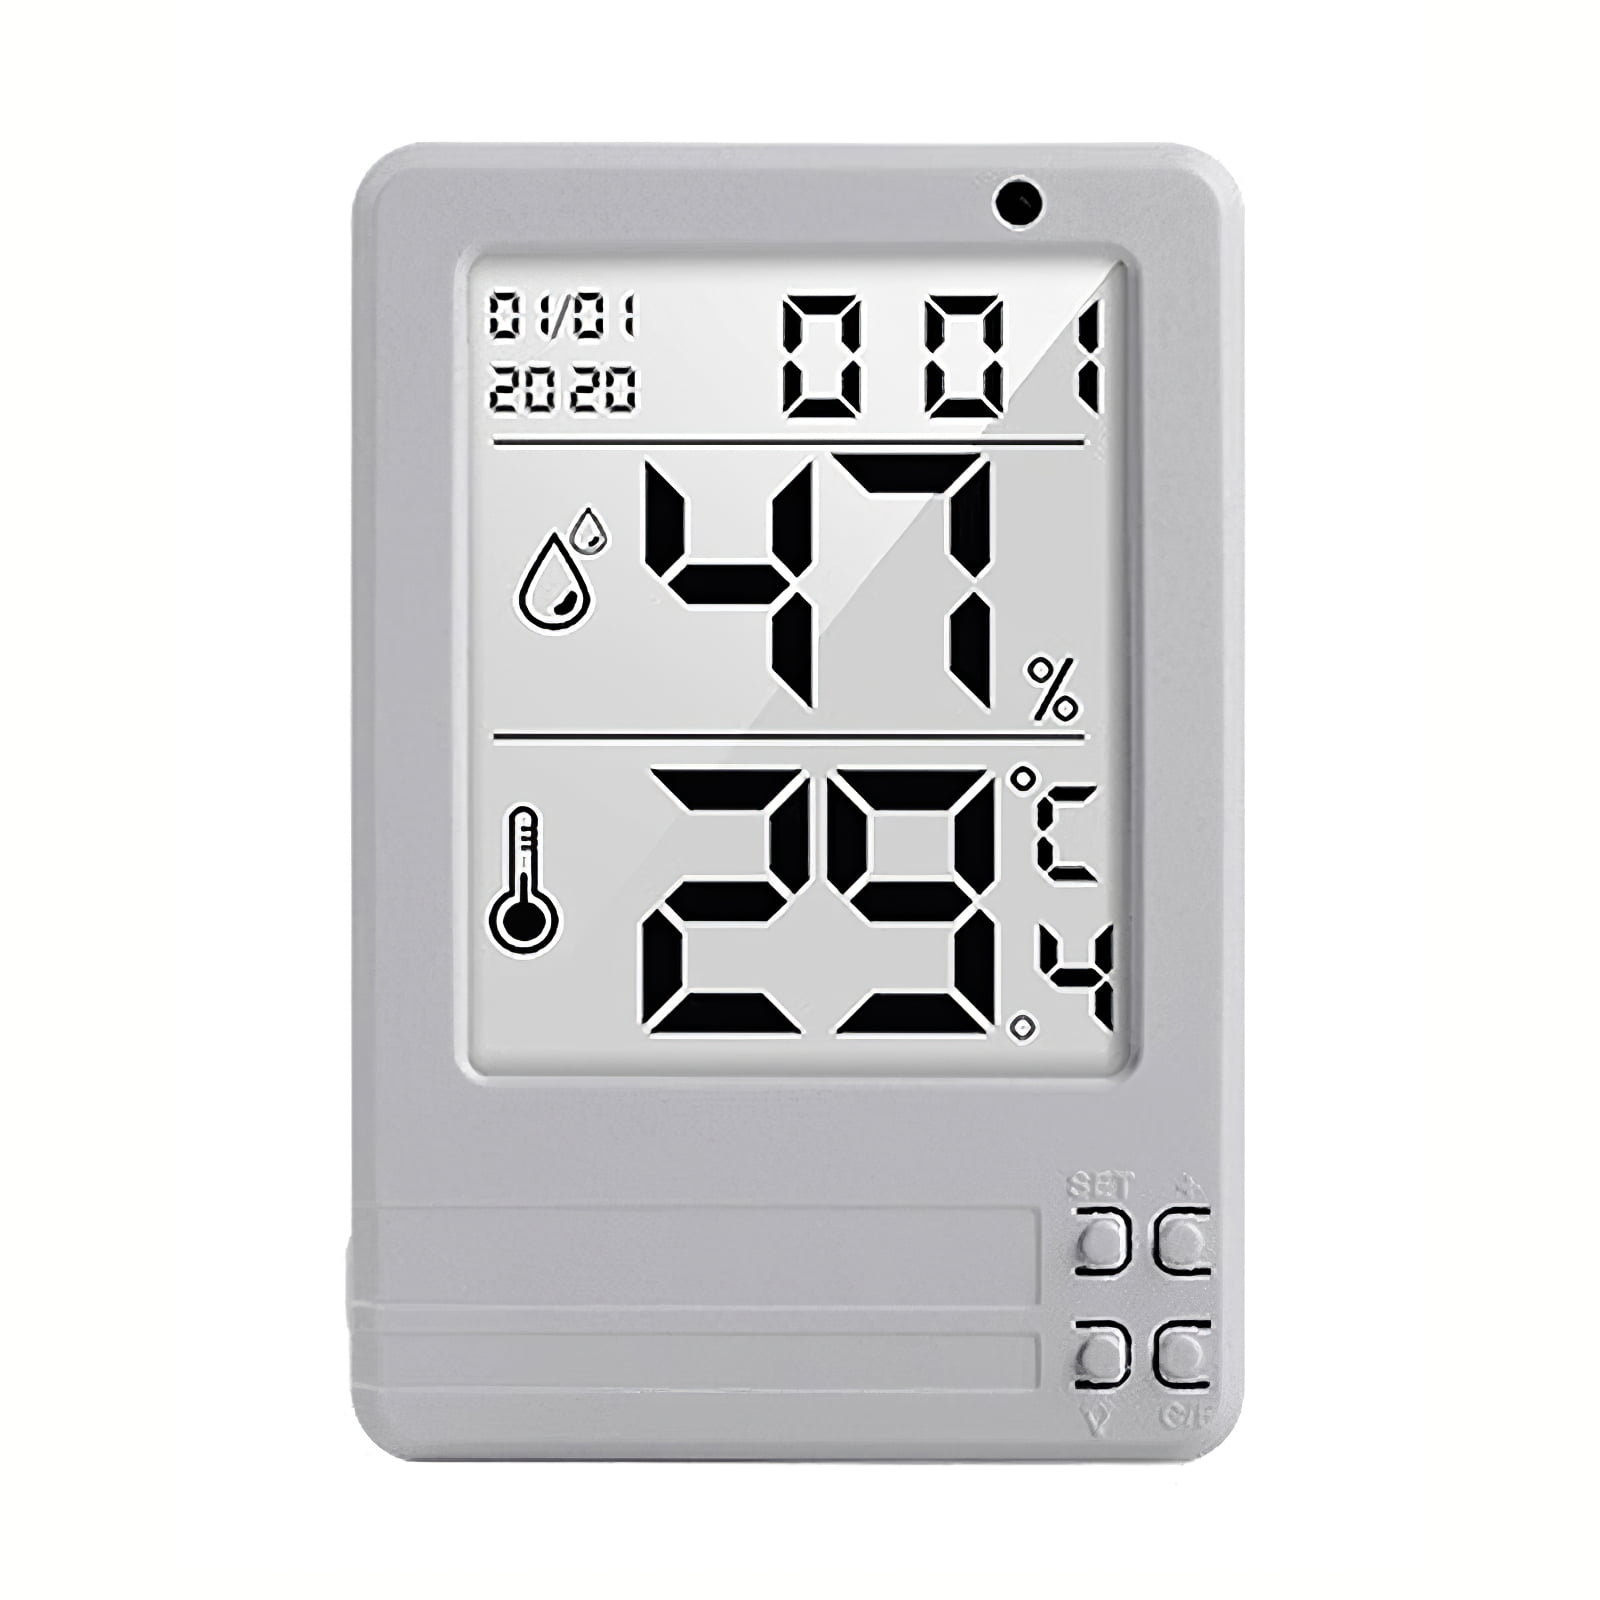 Details about   Digital Wireless Indoor Outdoor Thermo-Hygrometer Thermometer Humidity Meter 